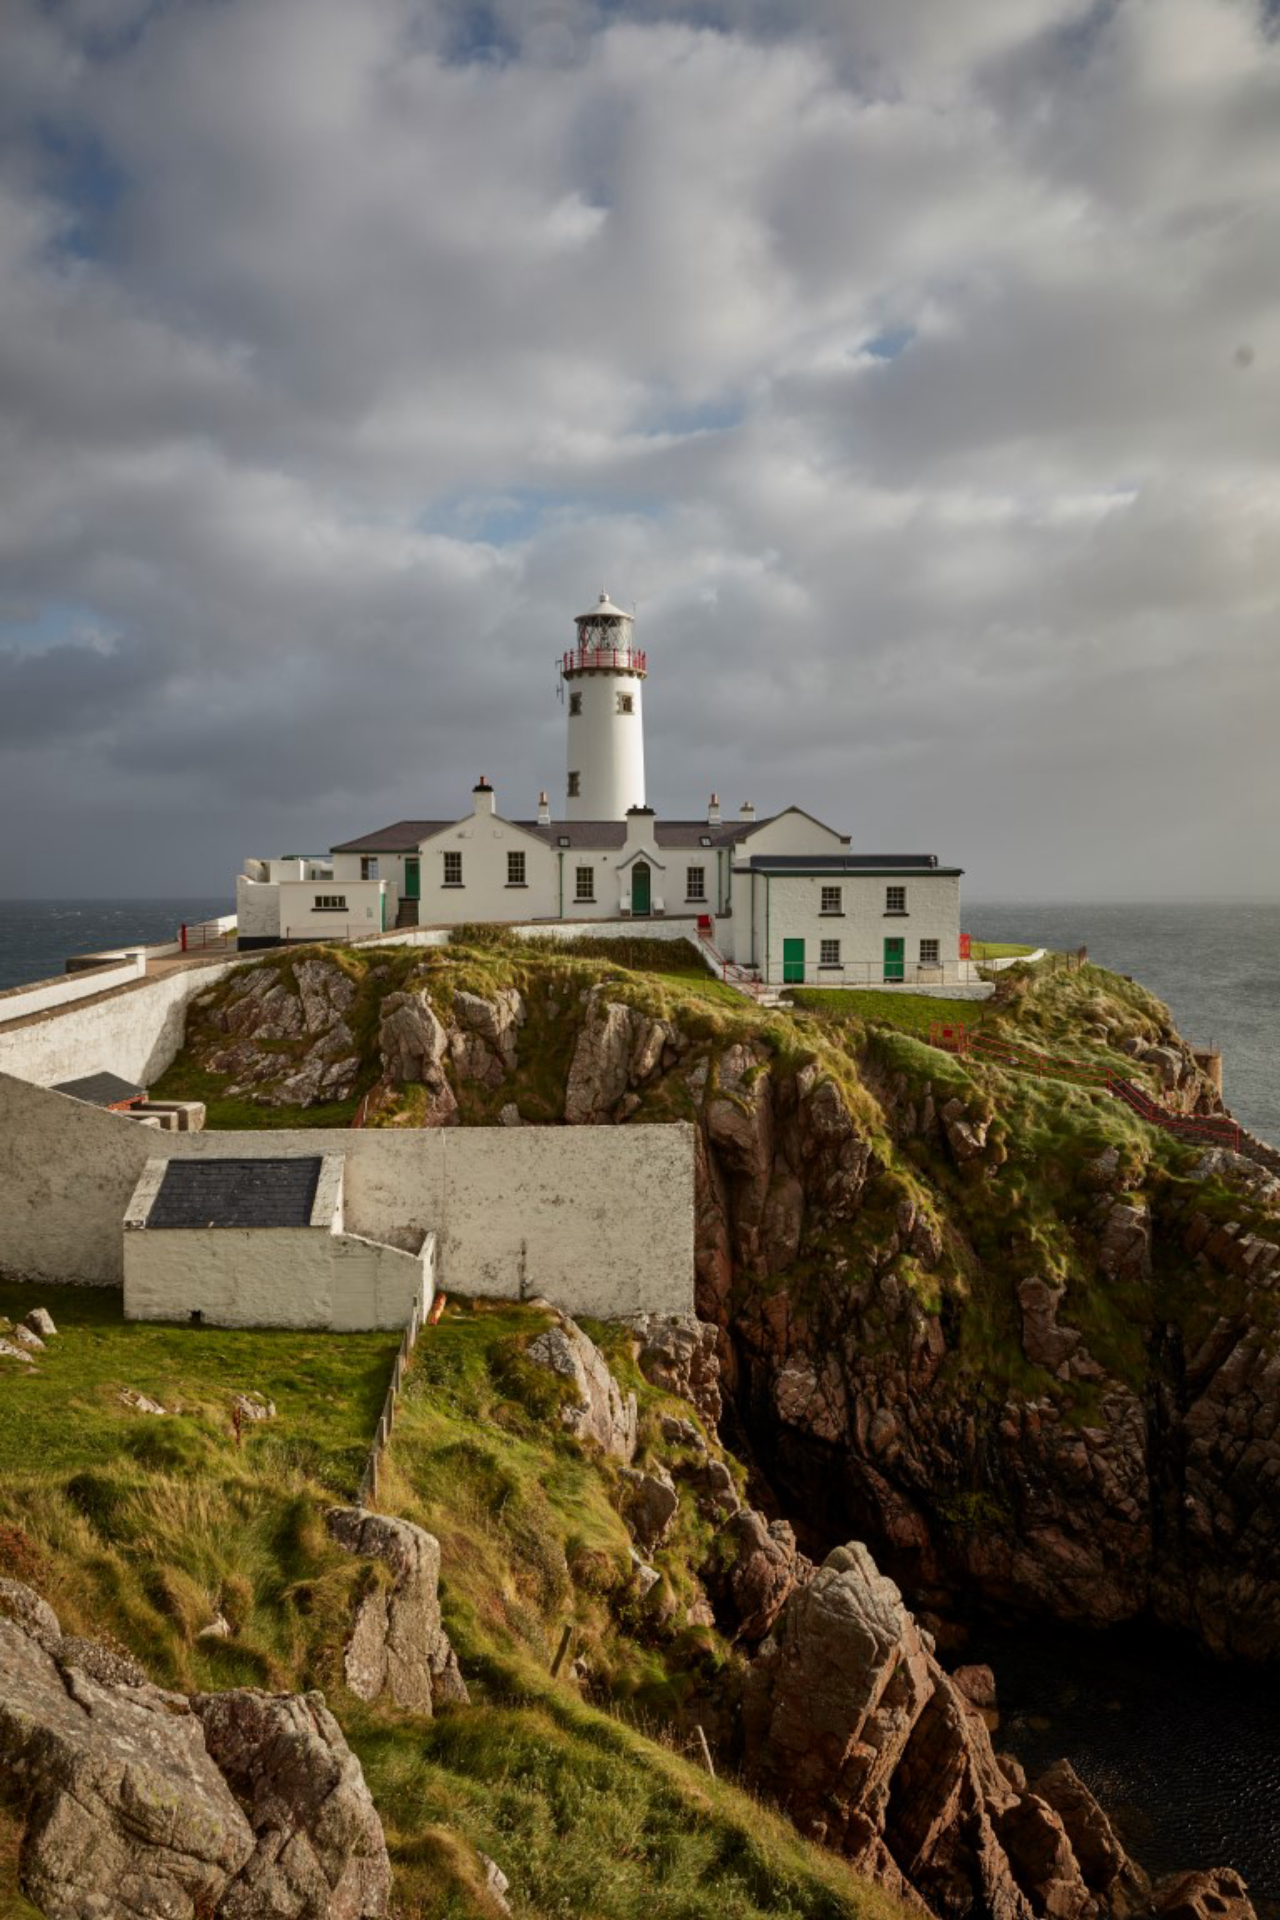 Fanad Head Lighthouse in County Donegal, Ireland, Sept. 27, 2016. Part of the Great Lighthouses of Ireland, a tourism trail introduced in 2015 that highlights 12 exceptional landmarks, the still-operational Fanad Head is one of IrelandÕs most scenic lighthouses, with self-catering apartments in former keepersÕ quarters. (Andy Haslam/The New York Times)